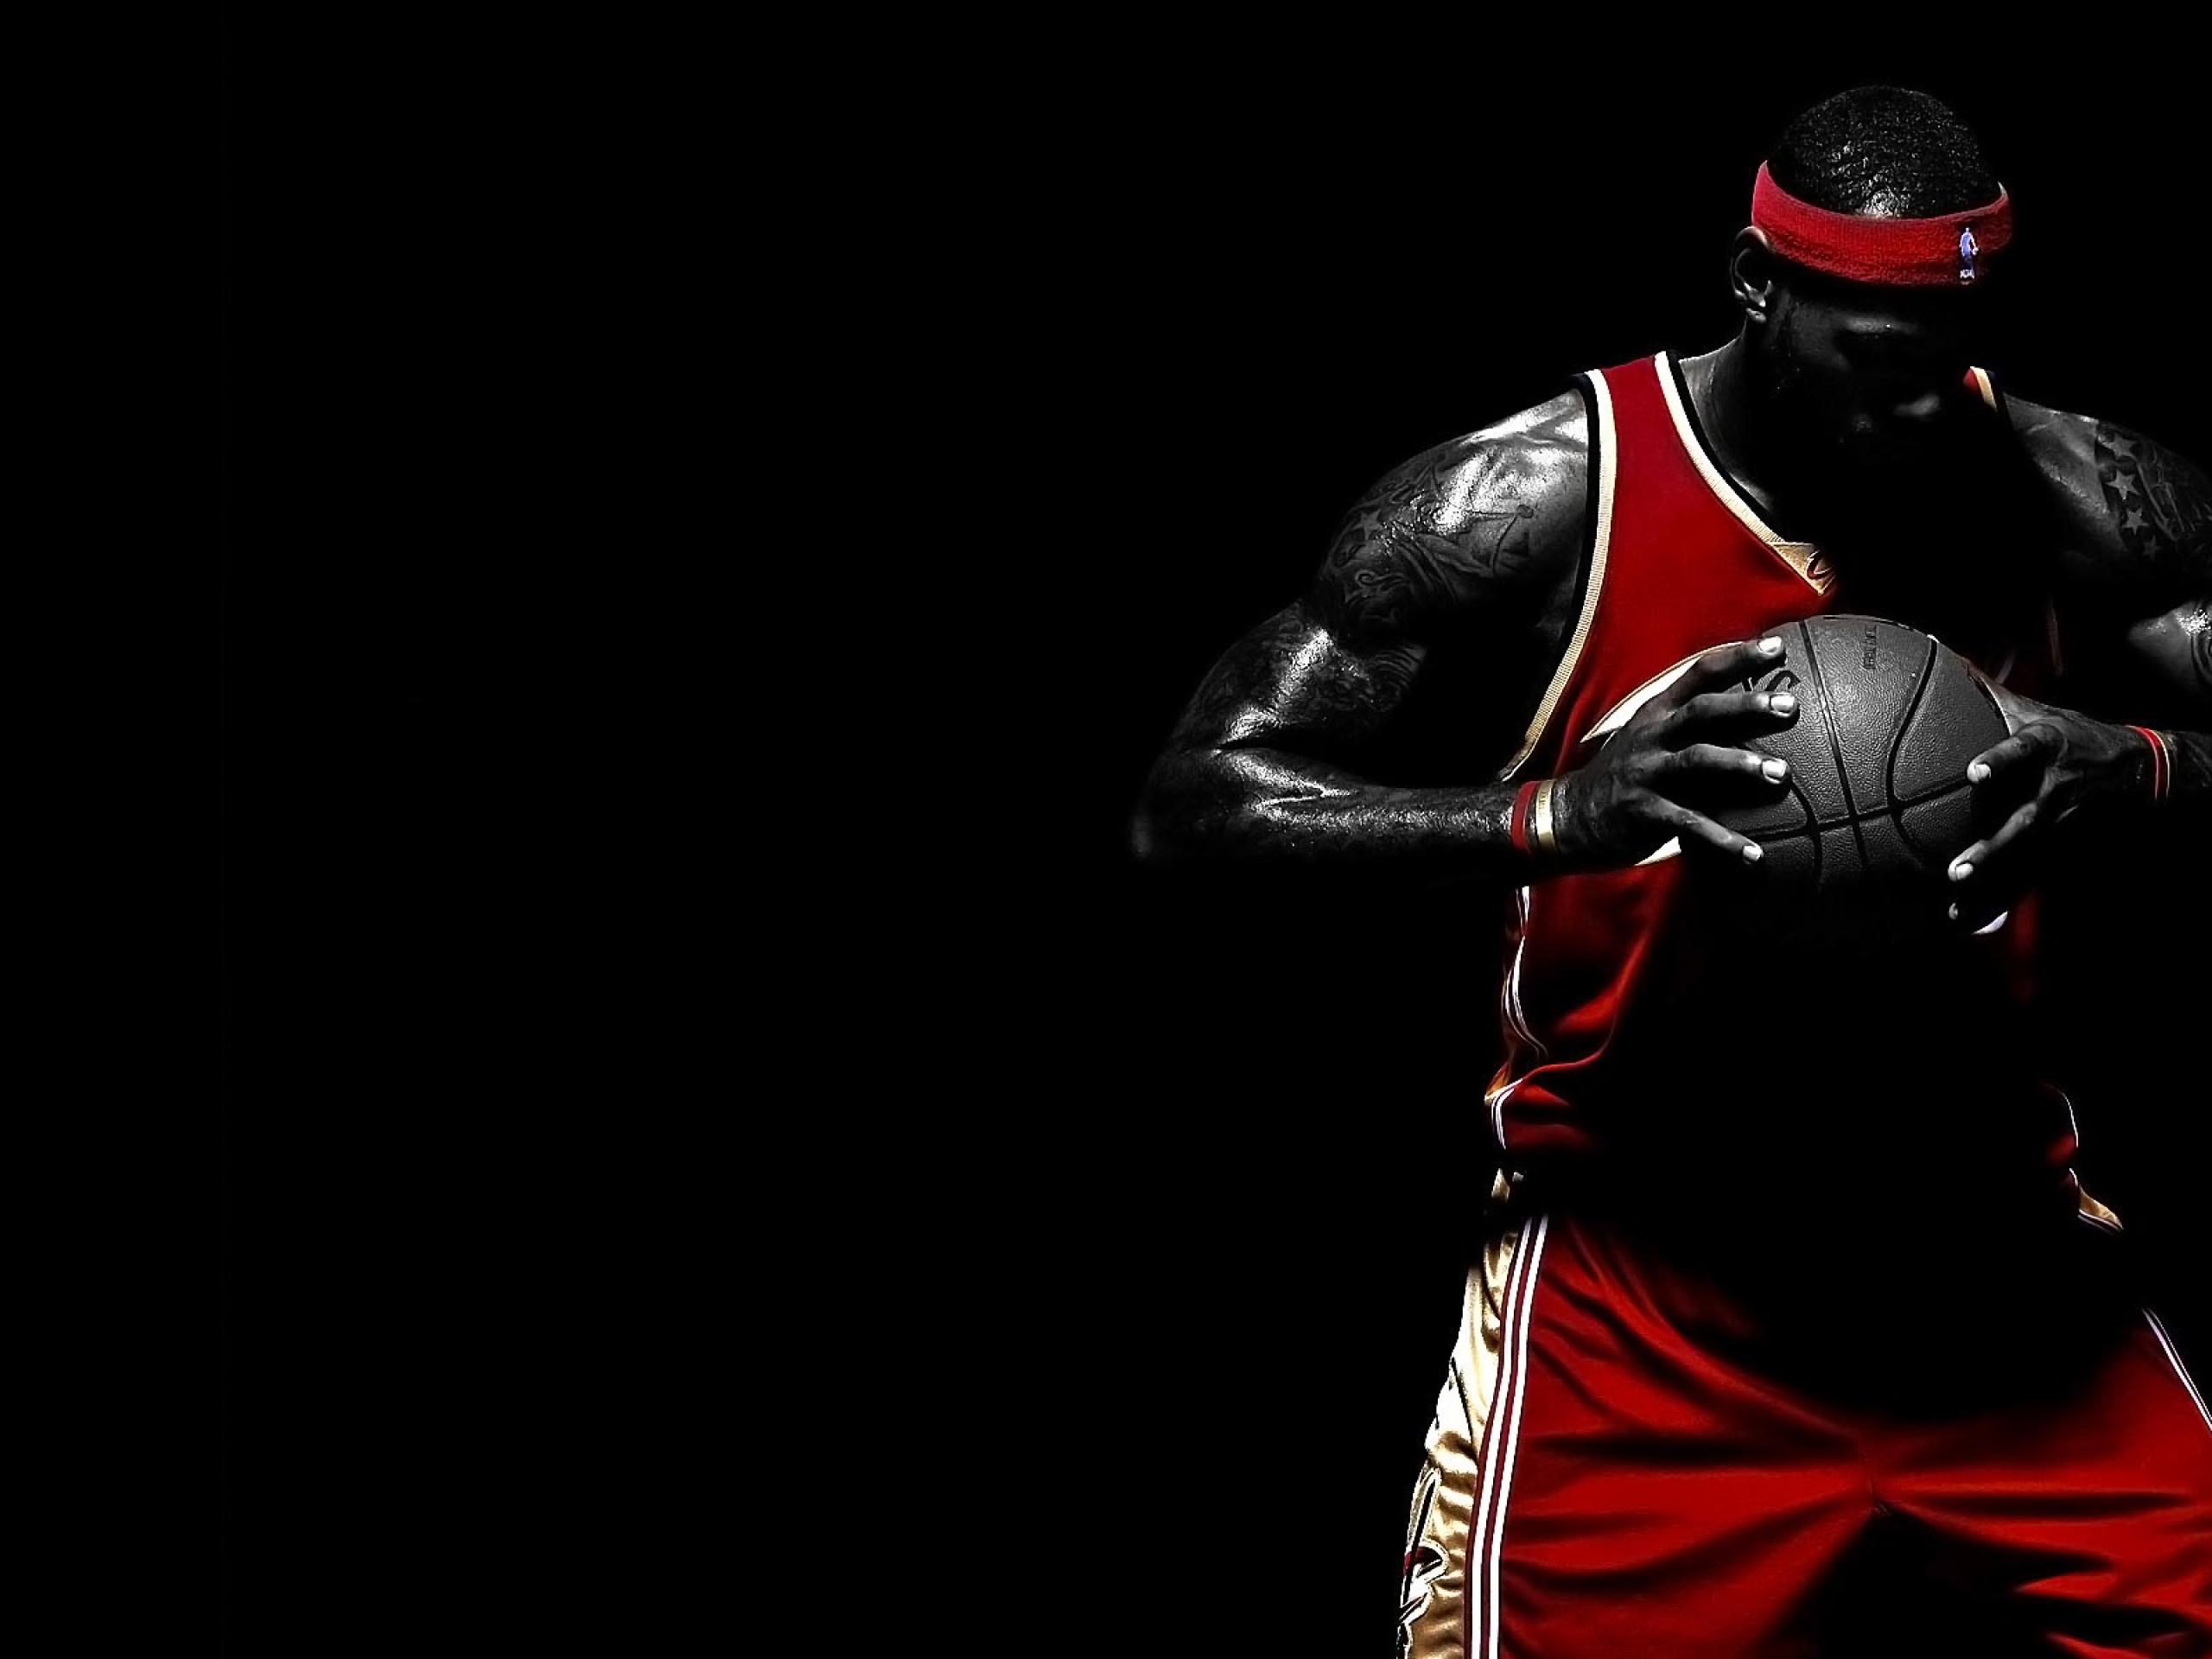 Basketball Wallpaper For Android Puter